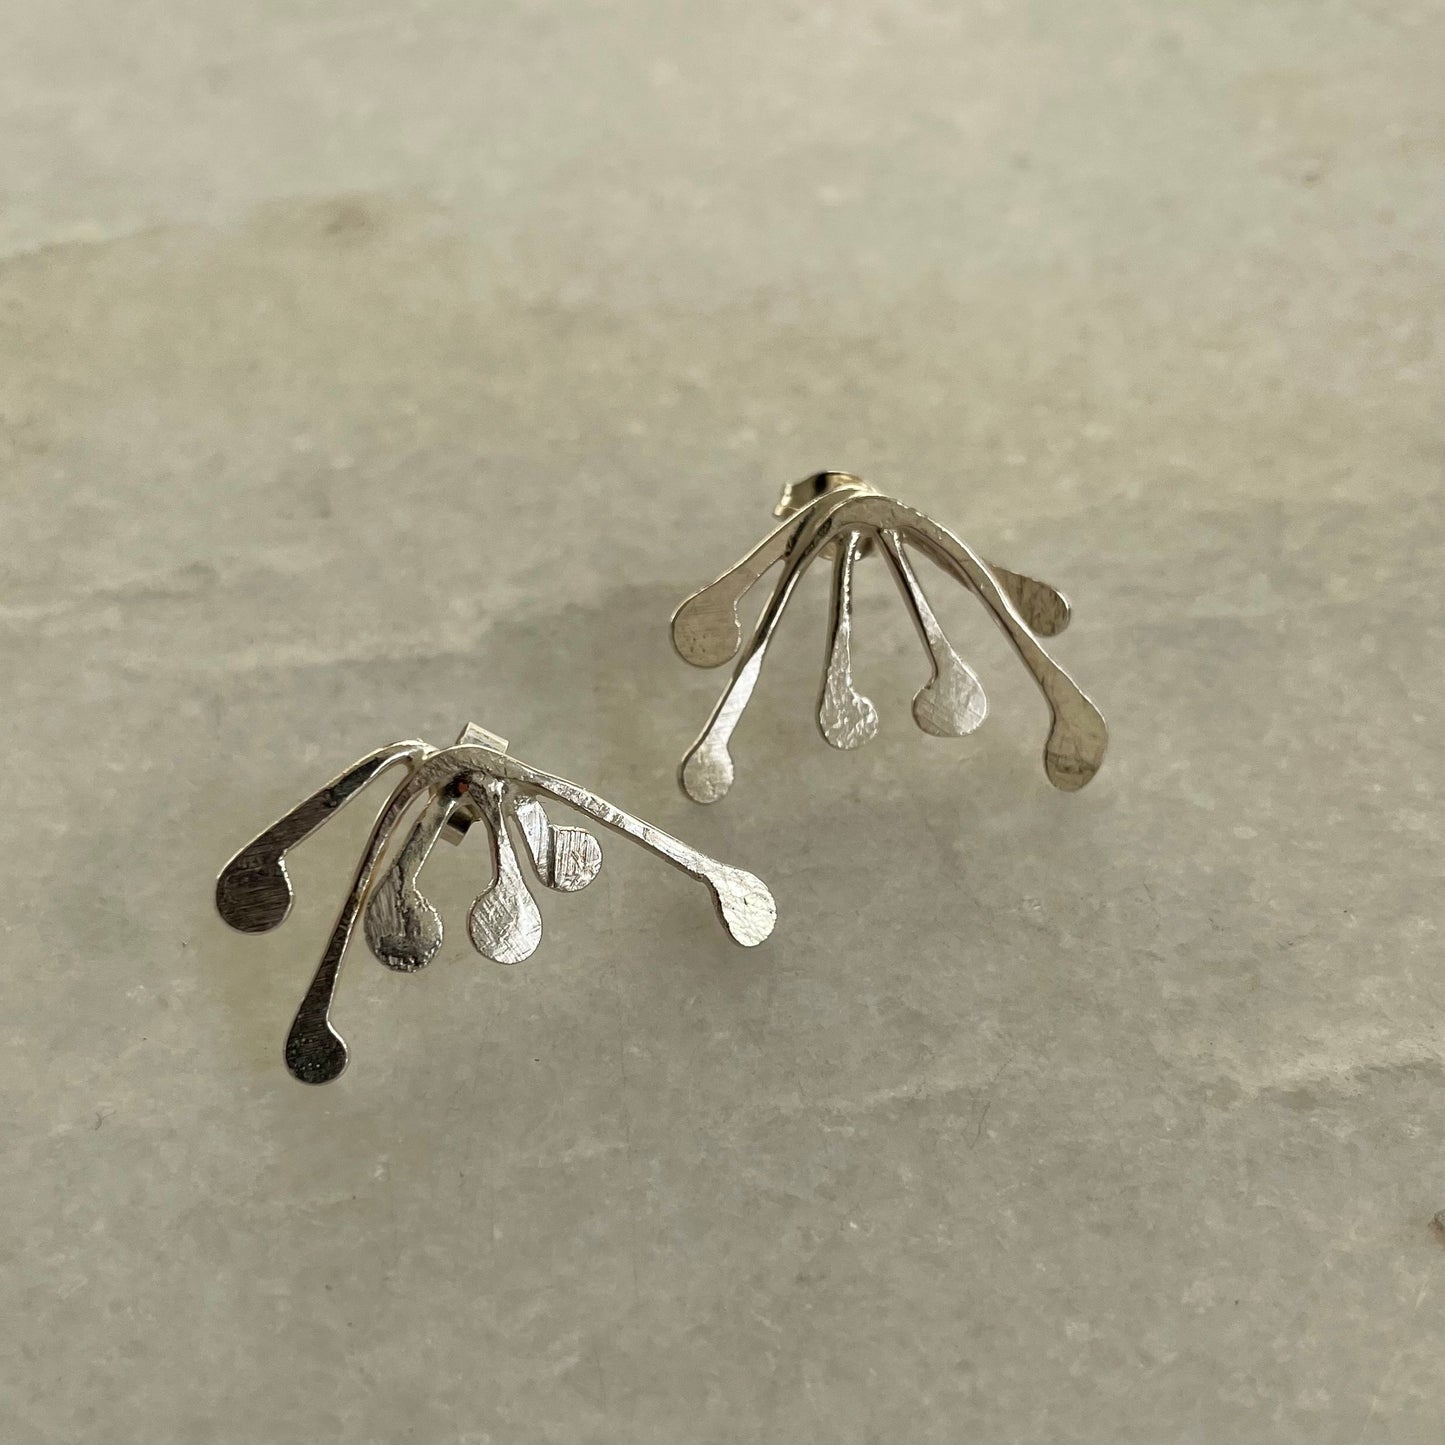 Mimosa Studs: recycled silver Mimosa inspired earrings - handmade sustainably in Suffolk.